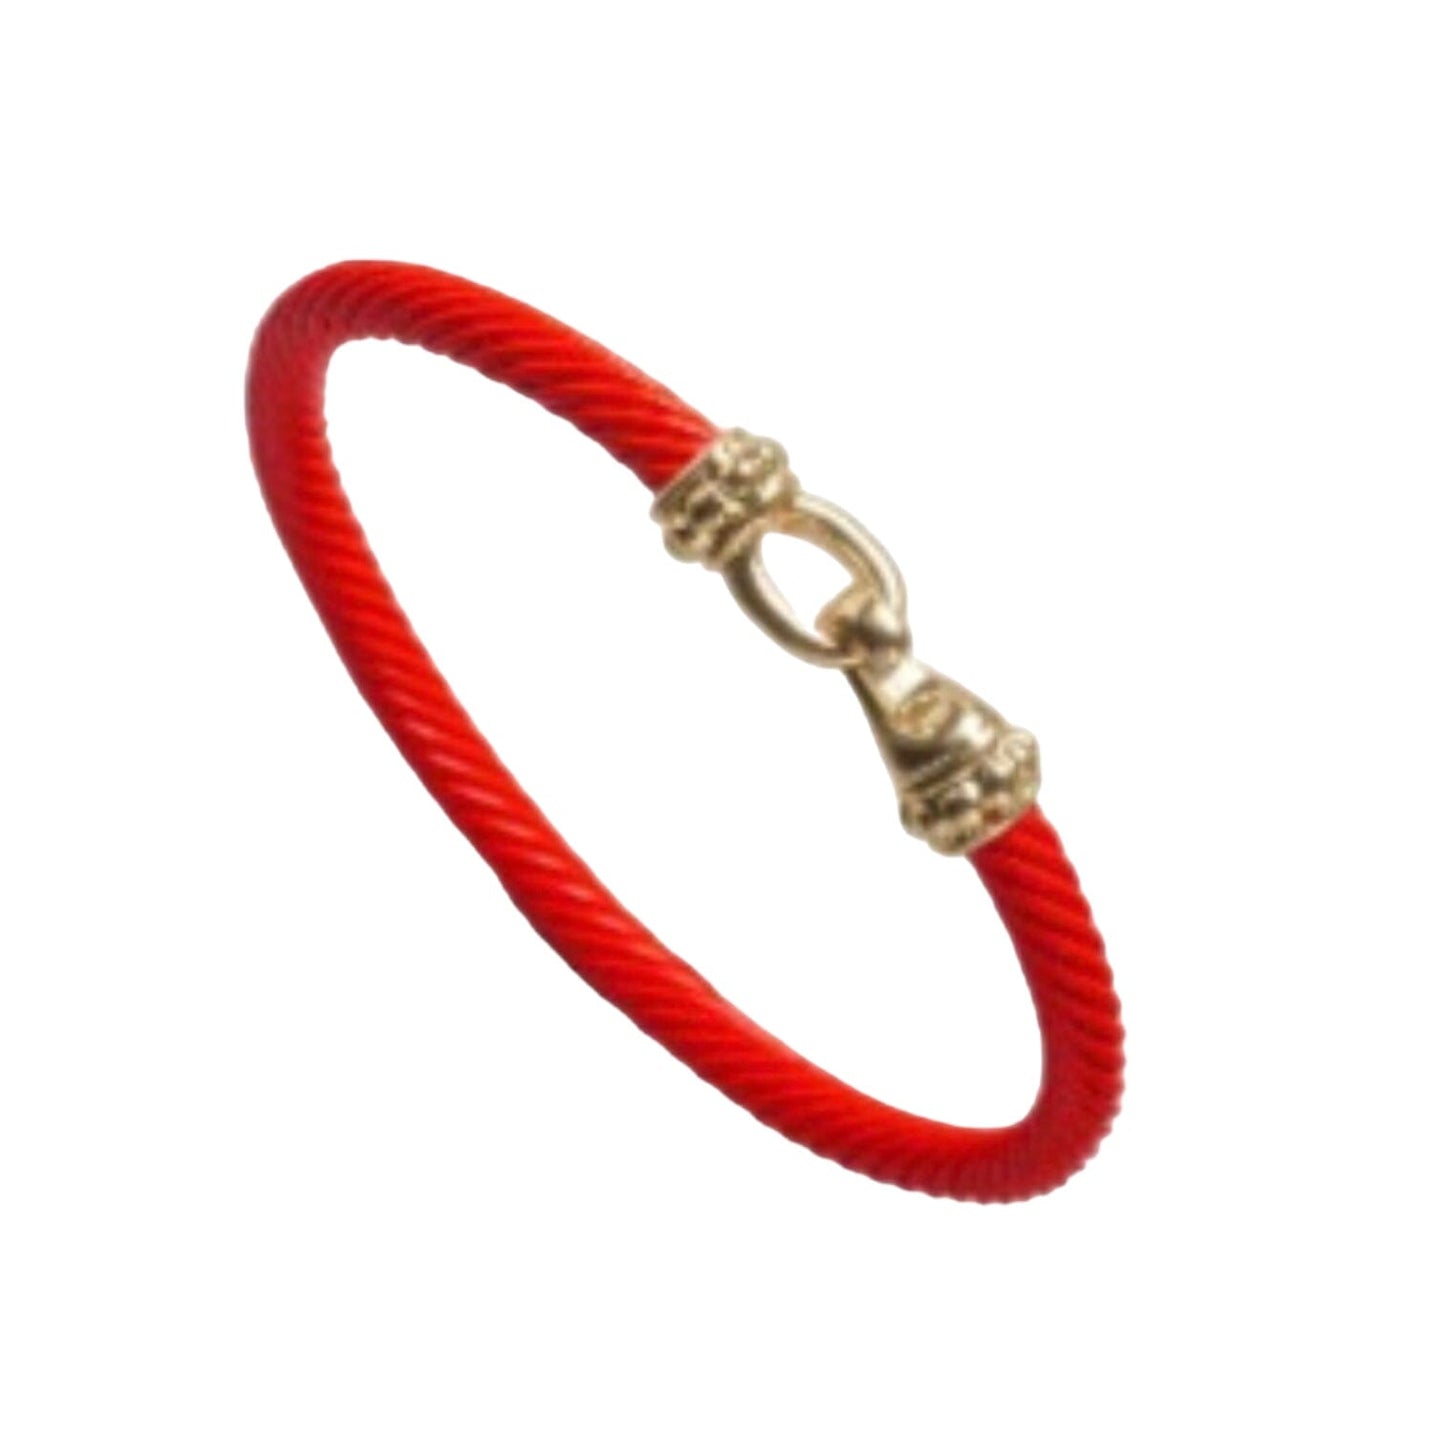 Bella Cable Gold Hook Bracelet Red and White Bracelets TRENDZIO Red 